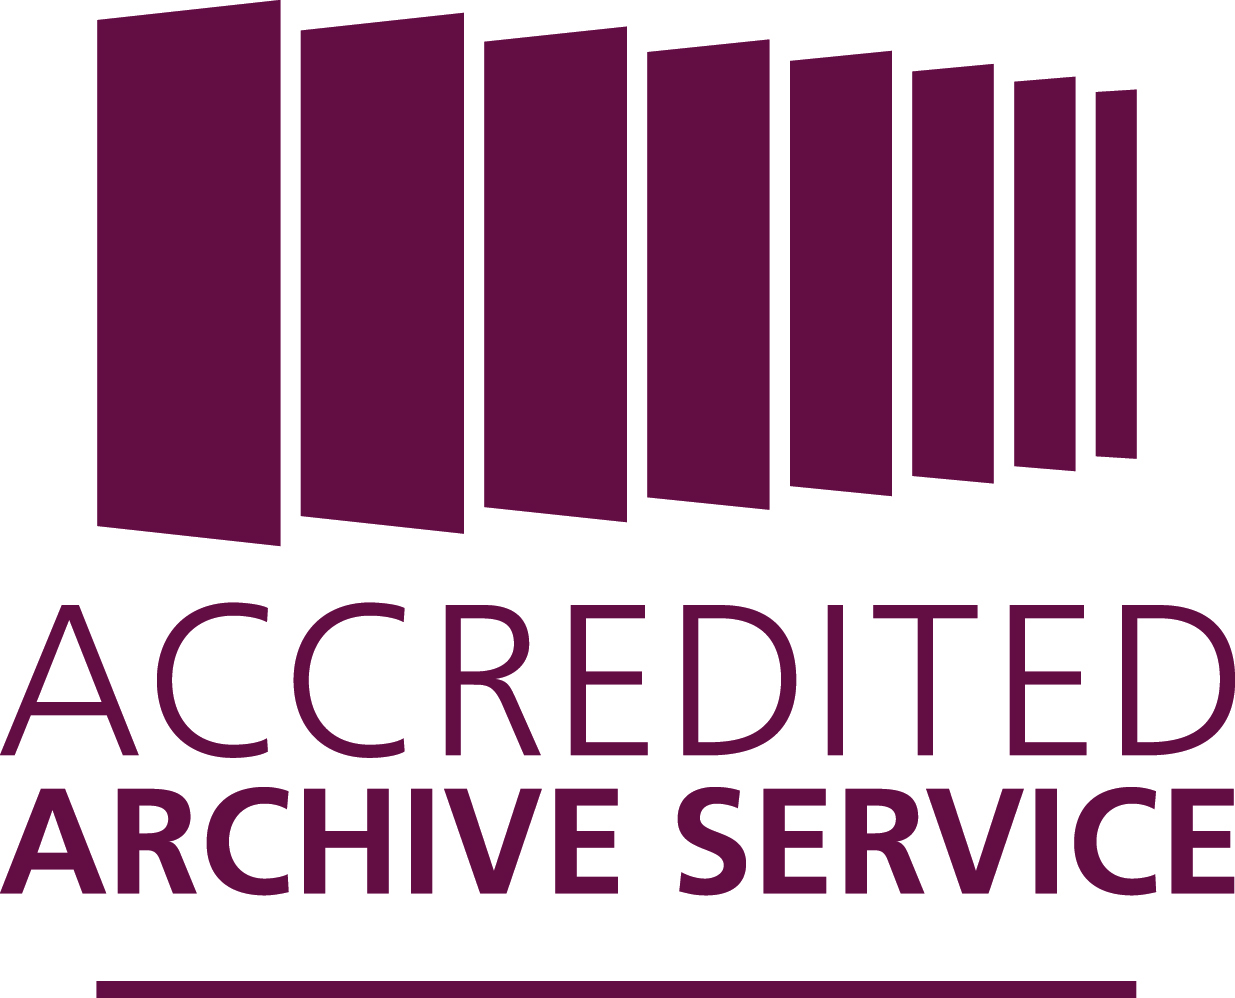 The Accredited Archive Service logo